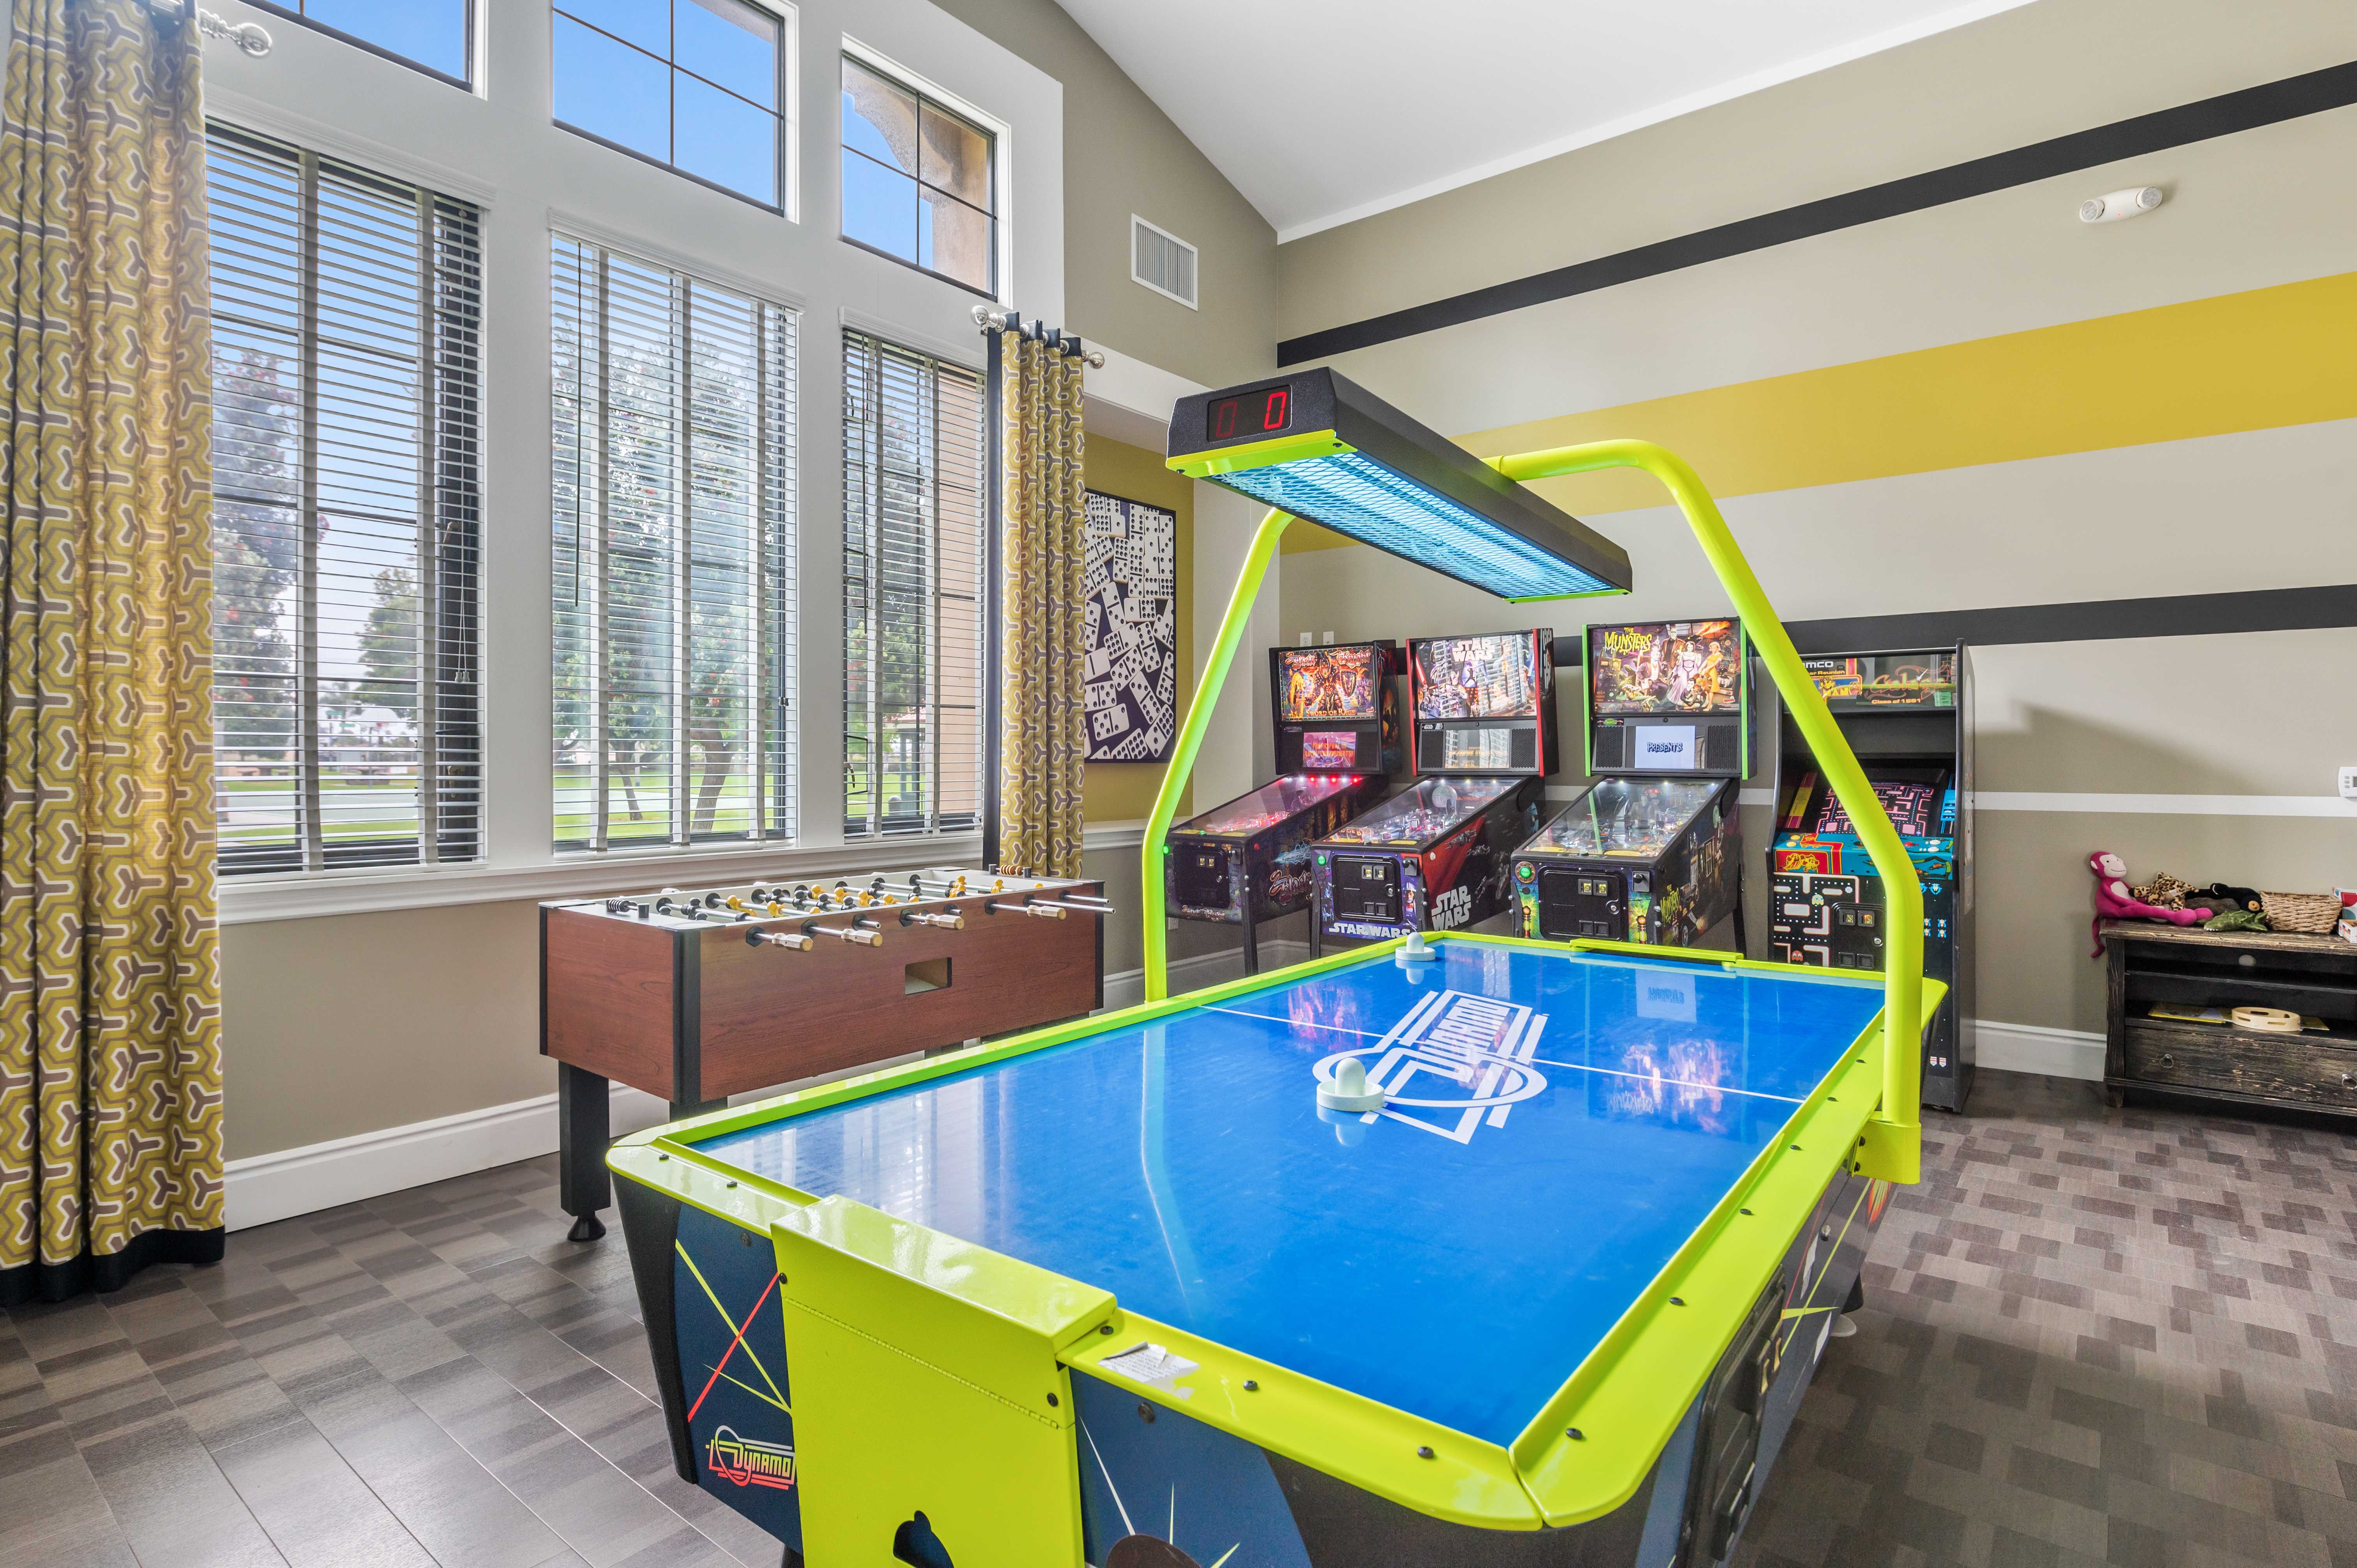 The community game room at at Coral Sea Cove in Port Hueneme, California